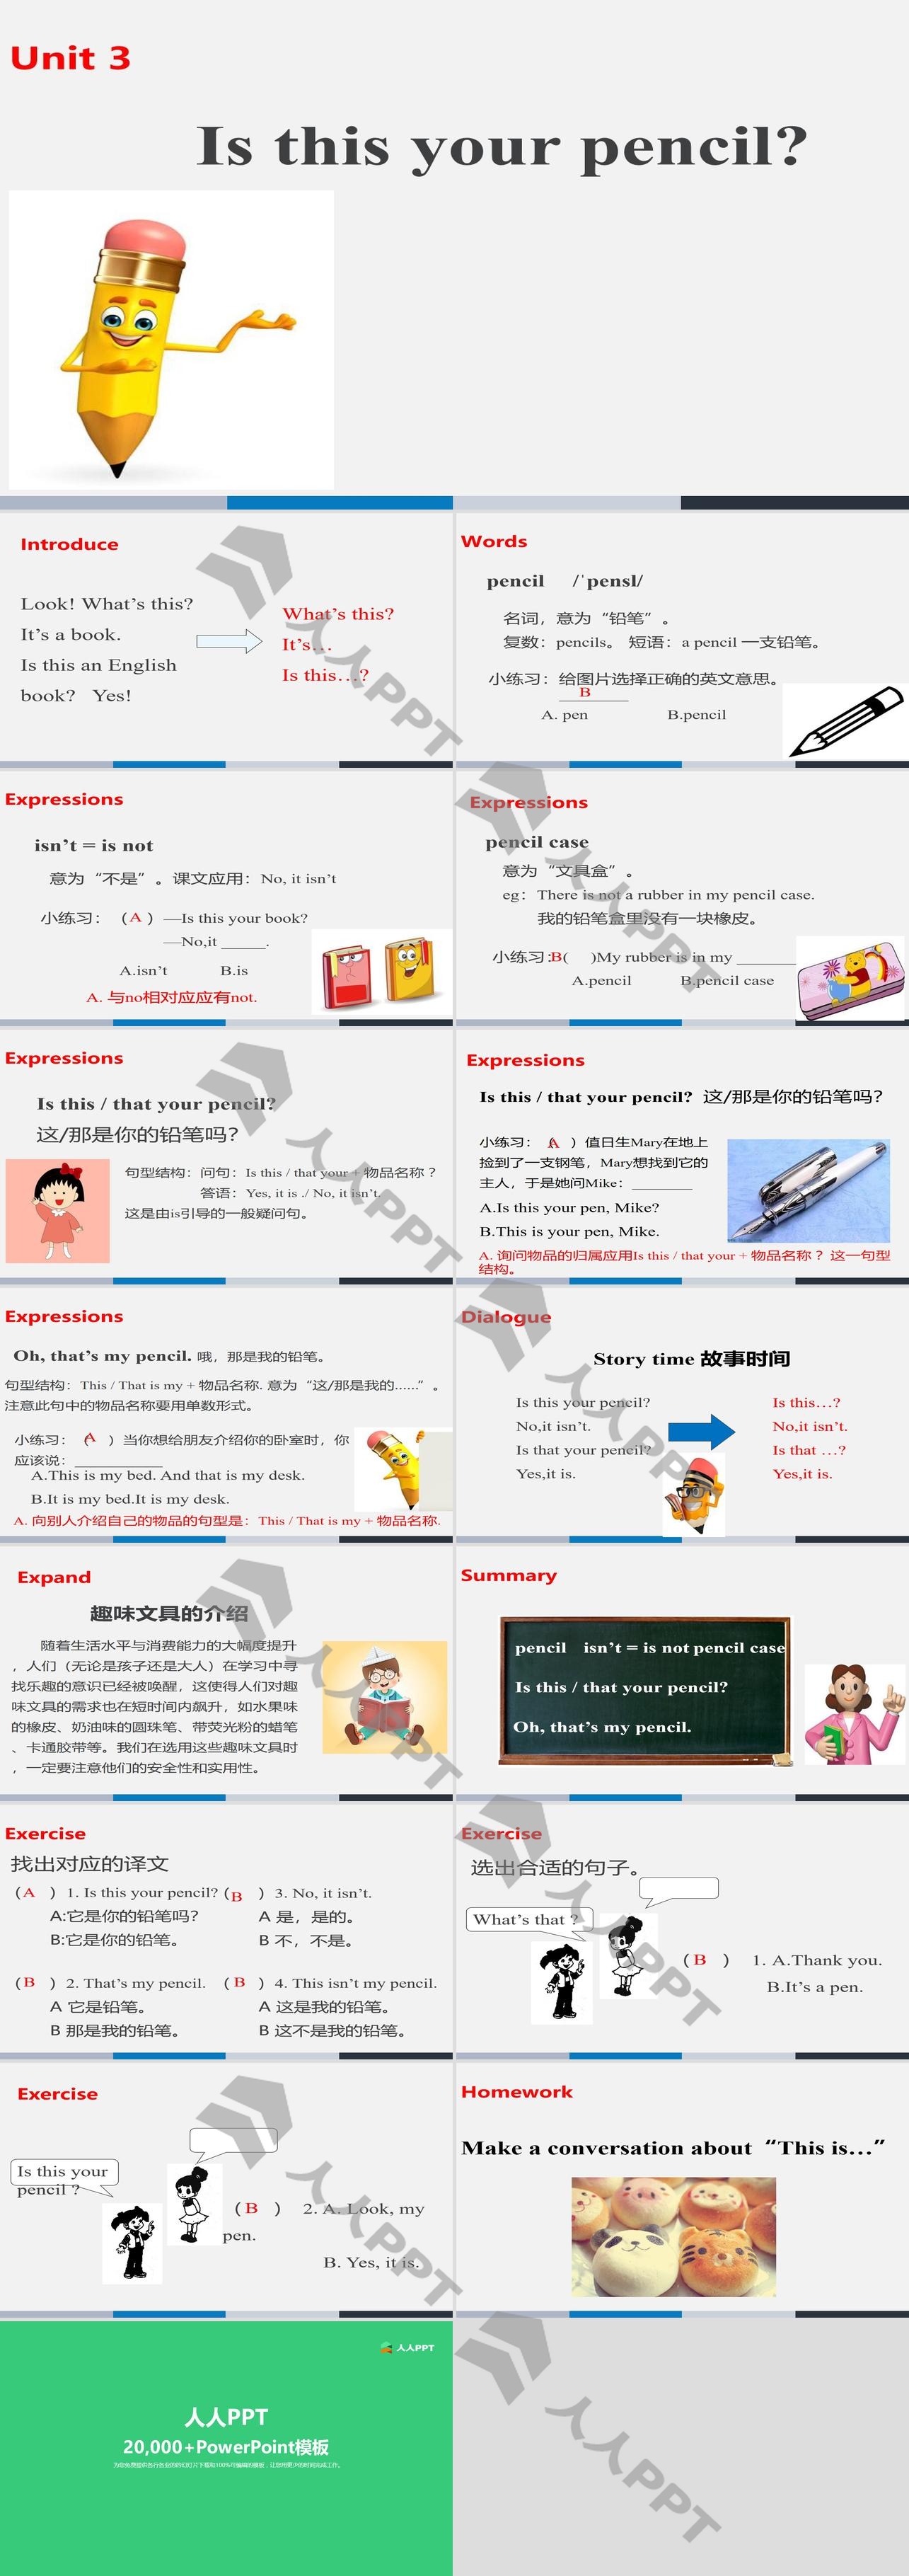 《Is this your pencil?》PPT(第一课时)长图